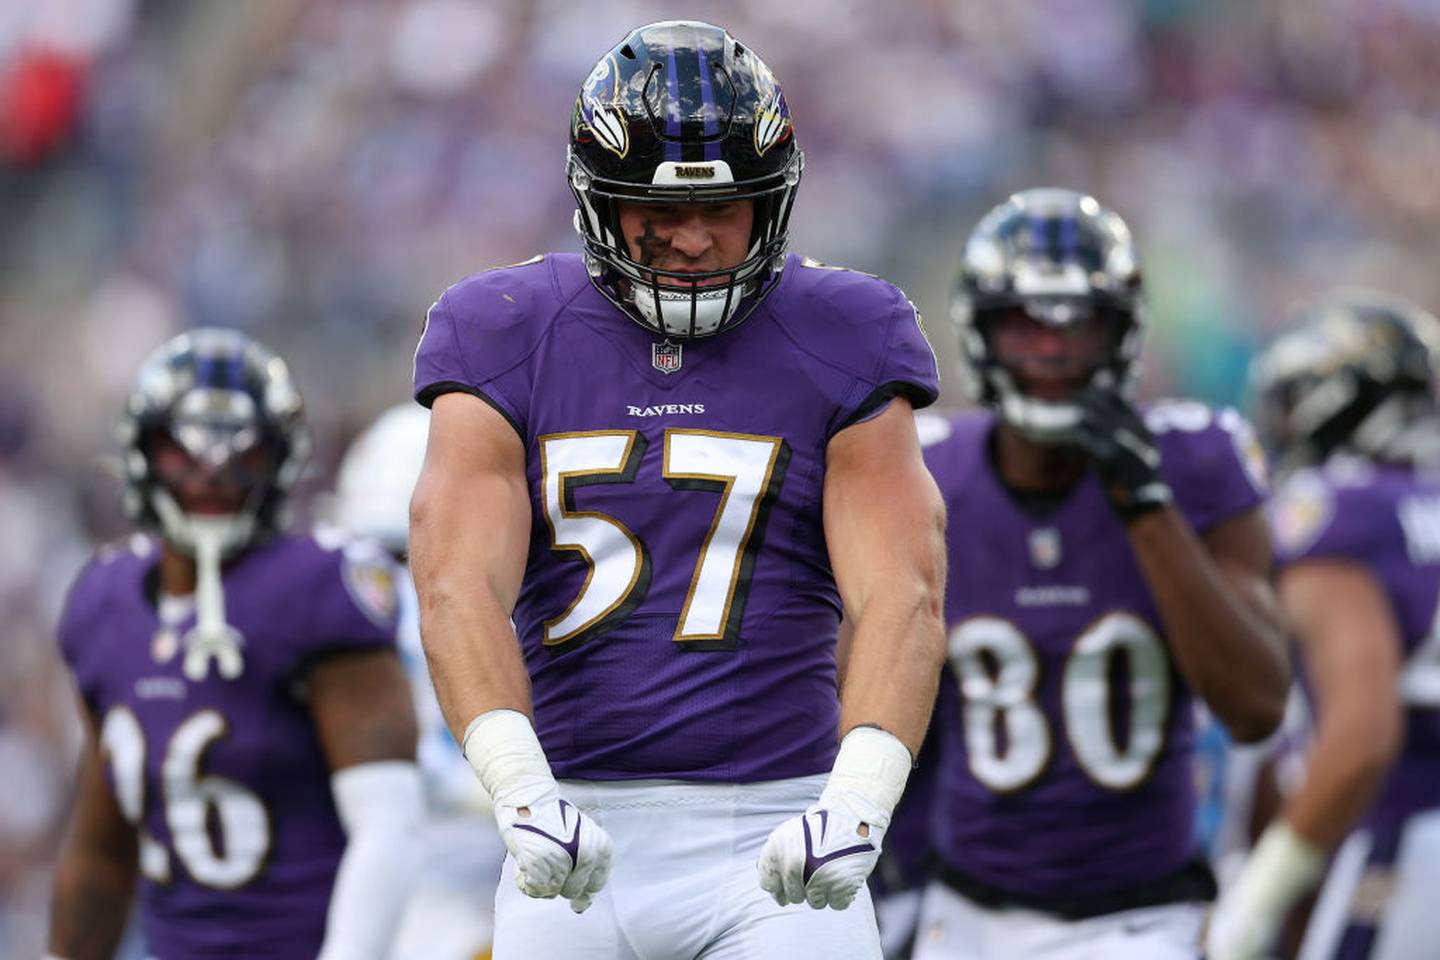 BALTIMORE, MARYLAND - OCTOBER 17: Kristian Welch #57 of the Baltimore Ravens reacts after a tackle during the first quarter against the Los Angeles Chargers at M&T Bank Stadium on October 17, 2021 in Baltimore, Maryland.